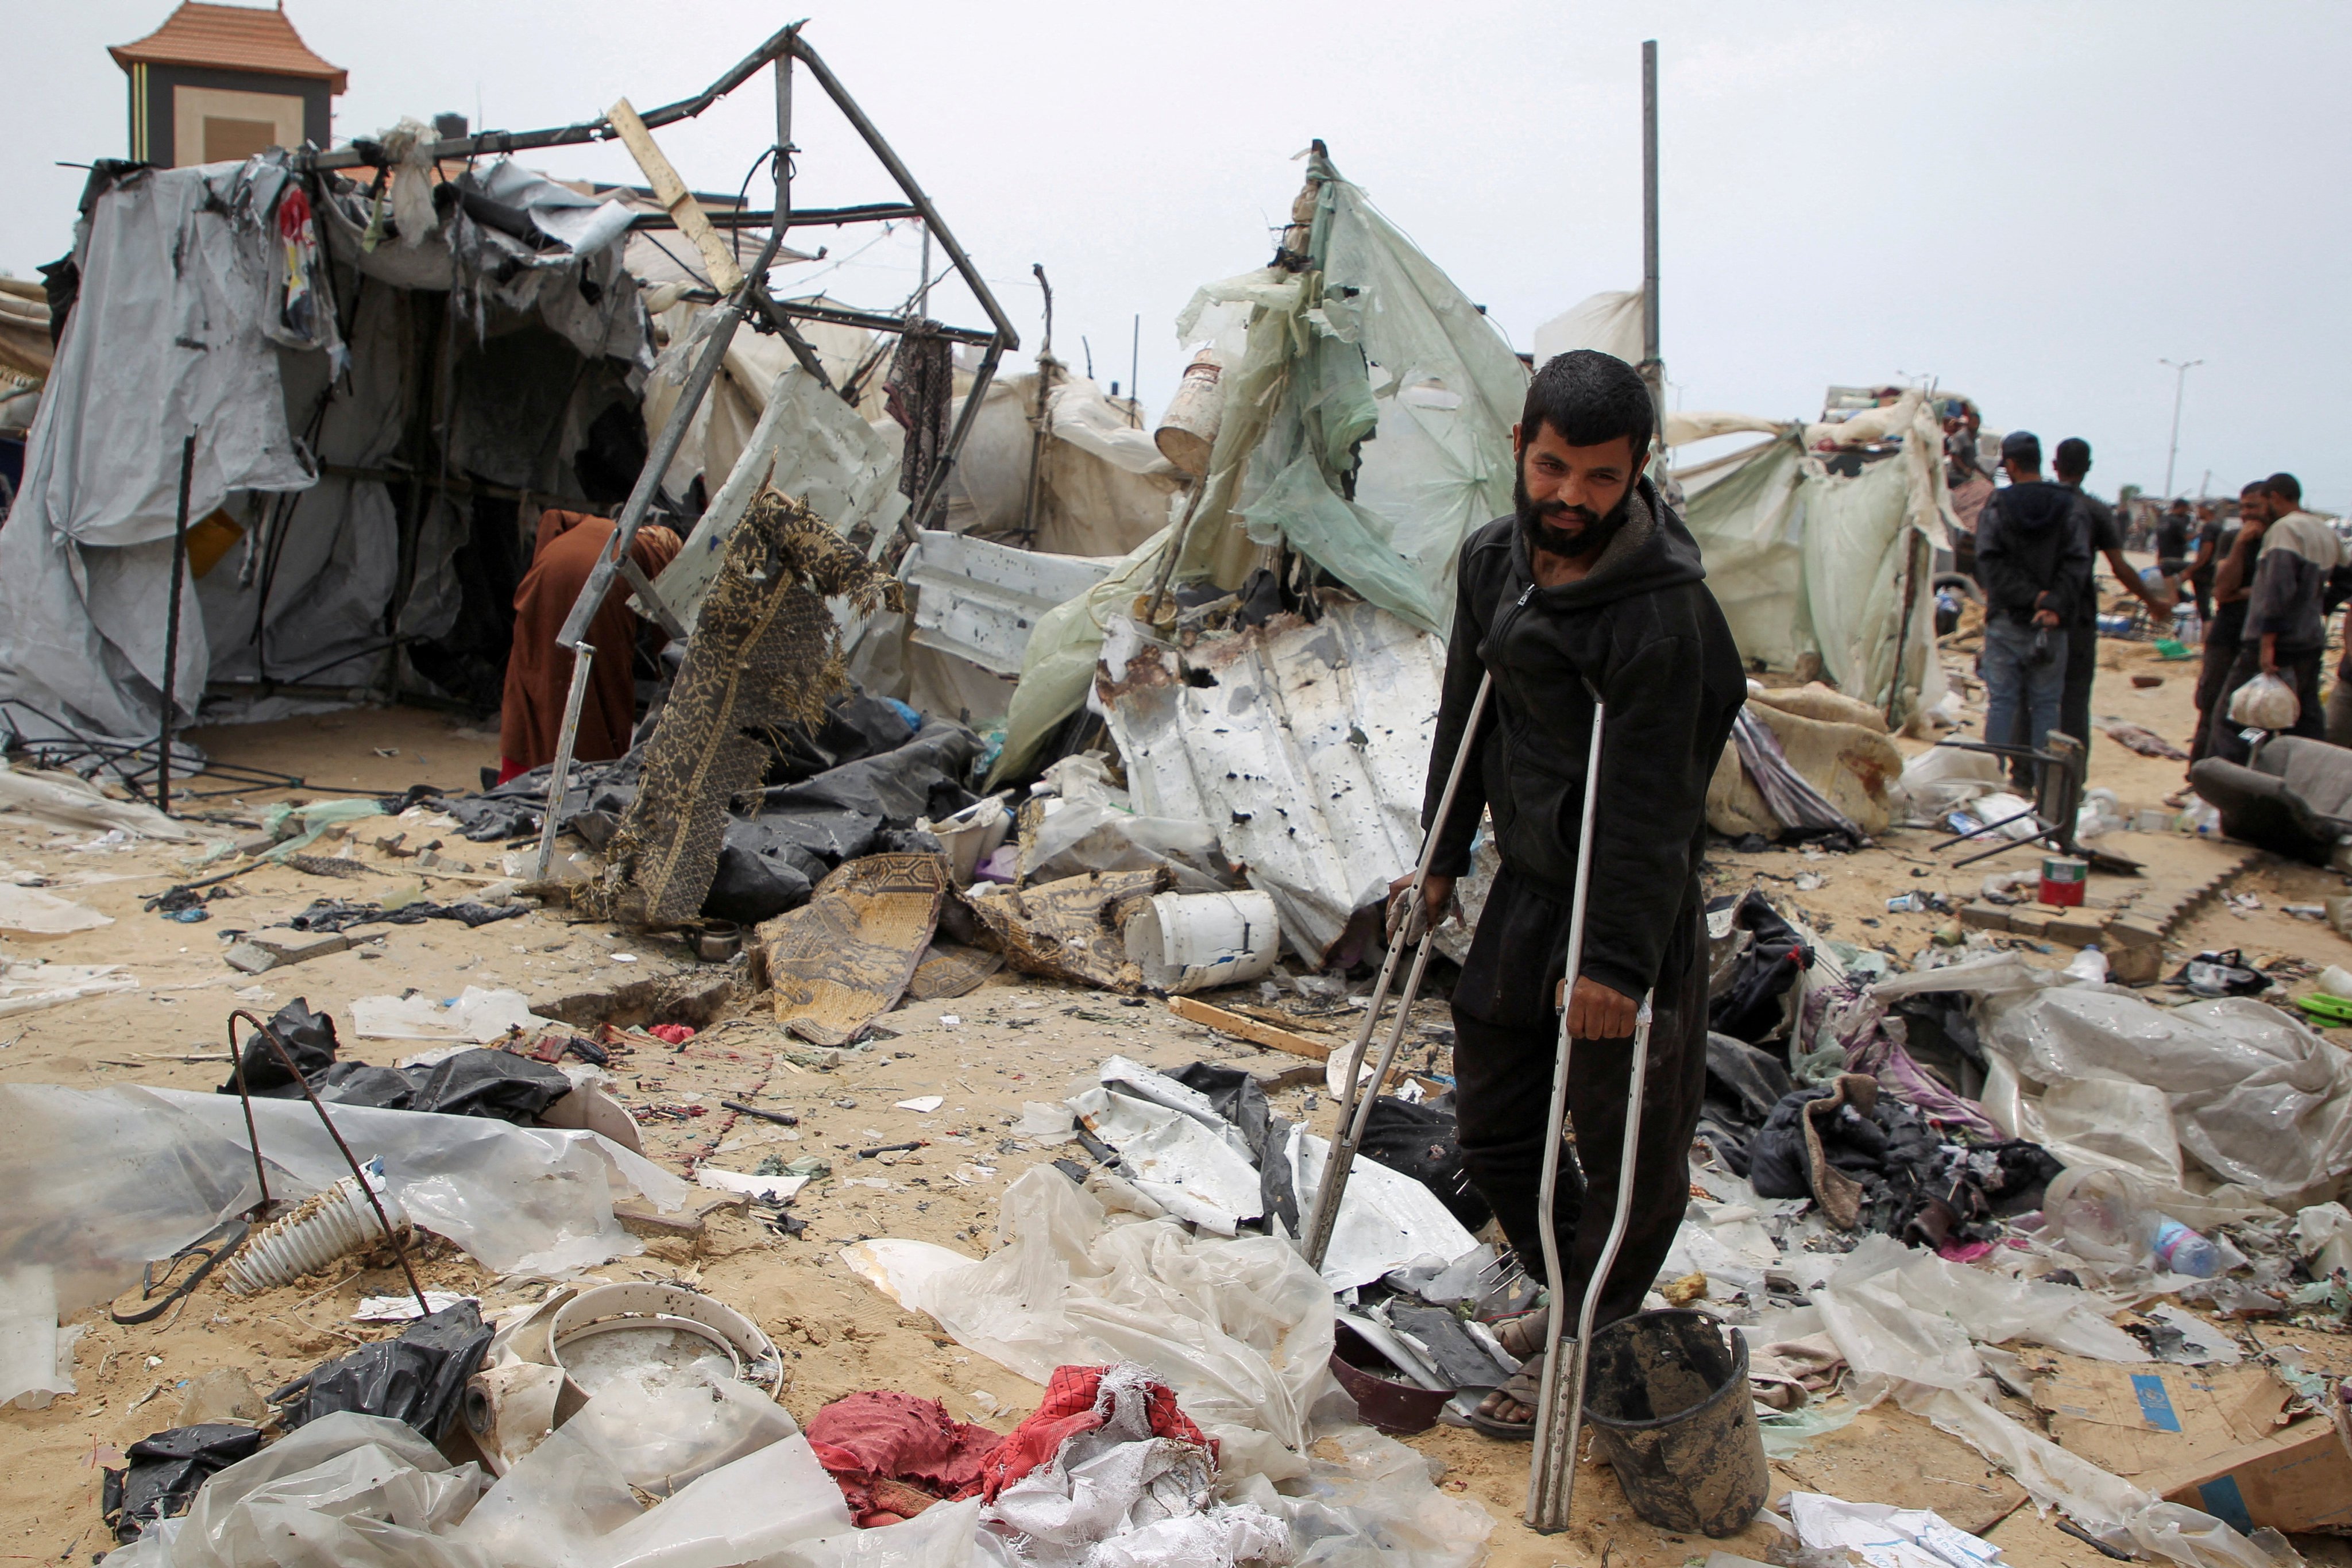 A man looks on as Palestinians on Tuesday inspect a tent camp damaged in an Israeli strike in Rafah. Photo: Reuters